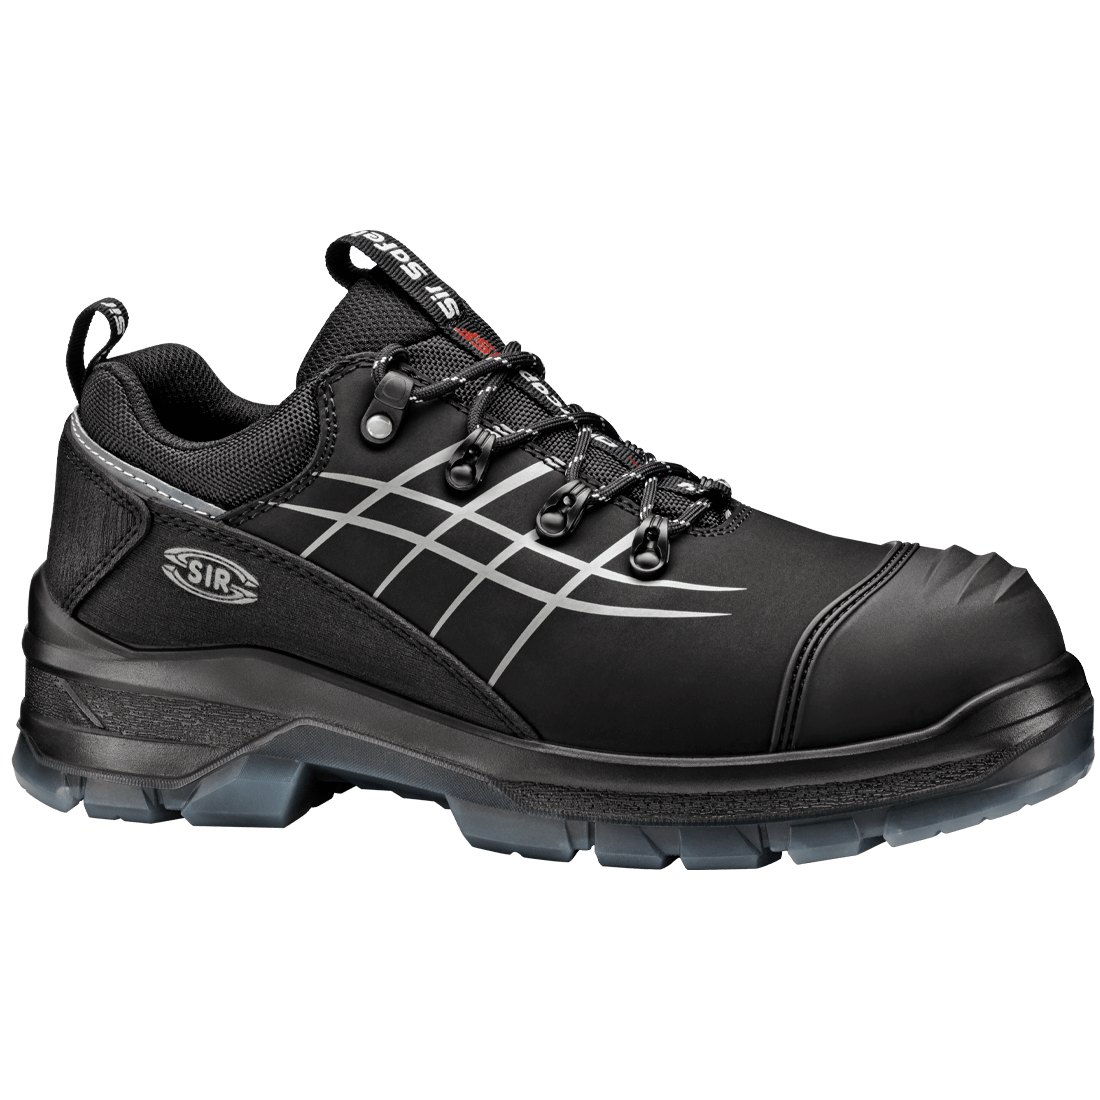 REX Sir OVERCAP SHOE BSF Safety System NEW |